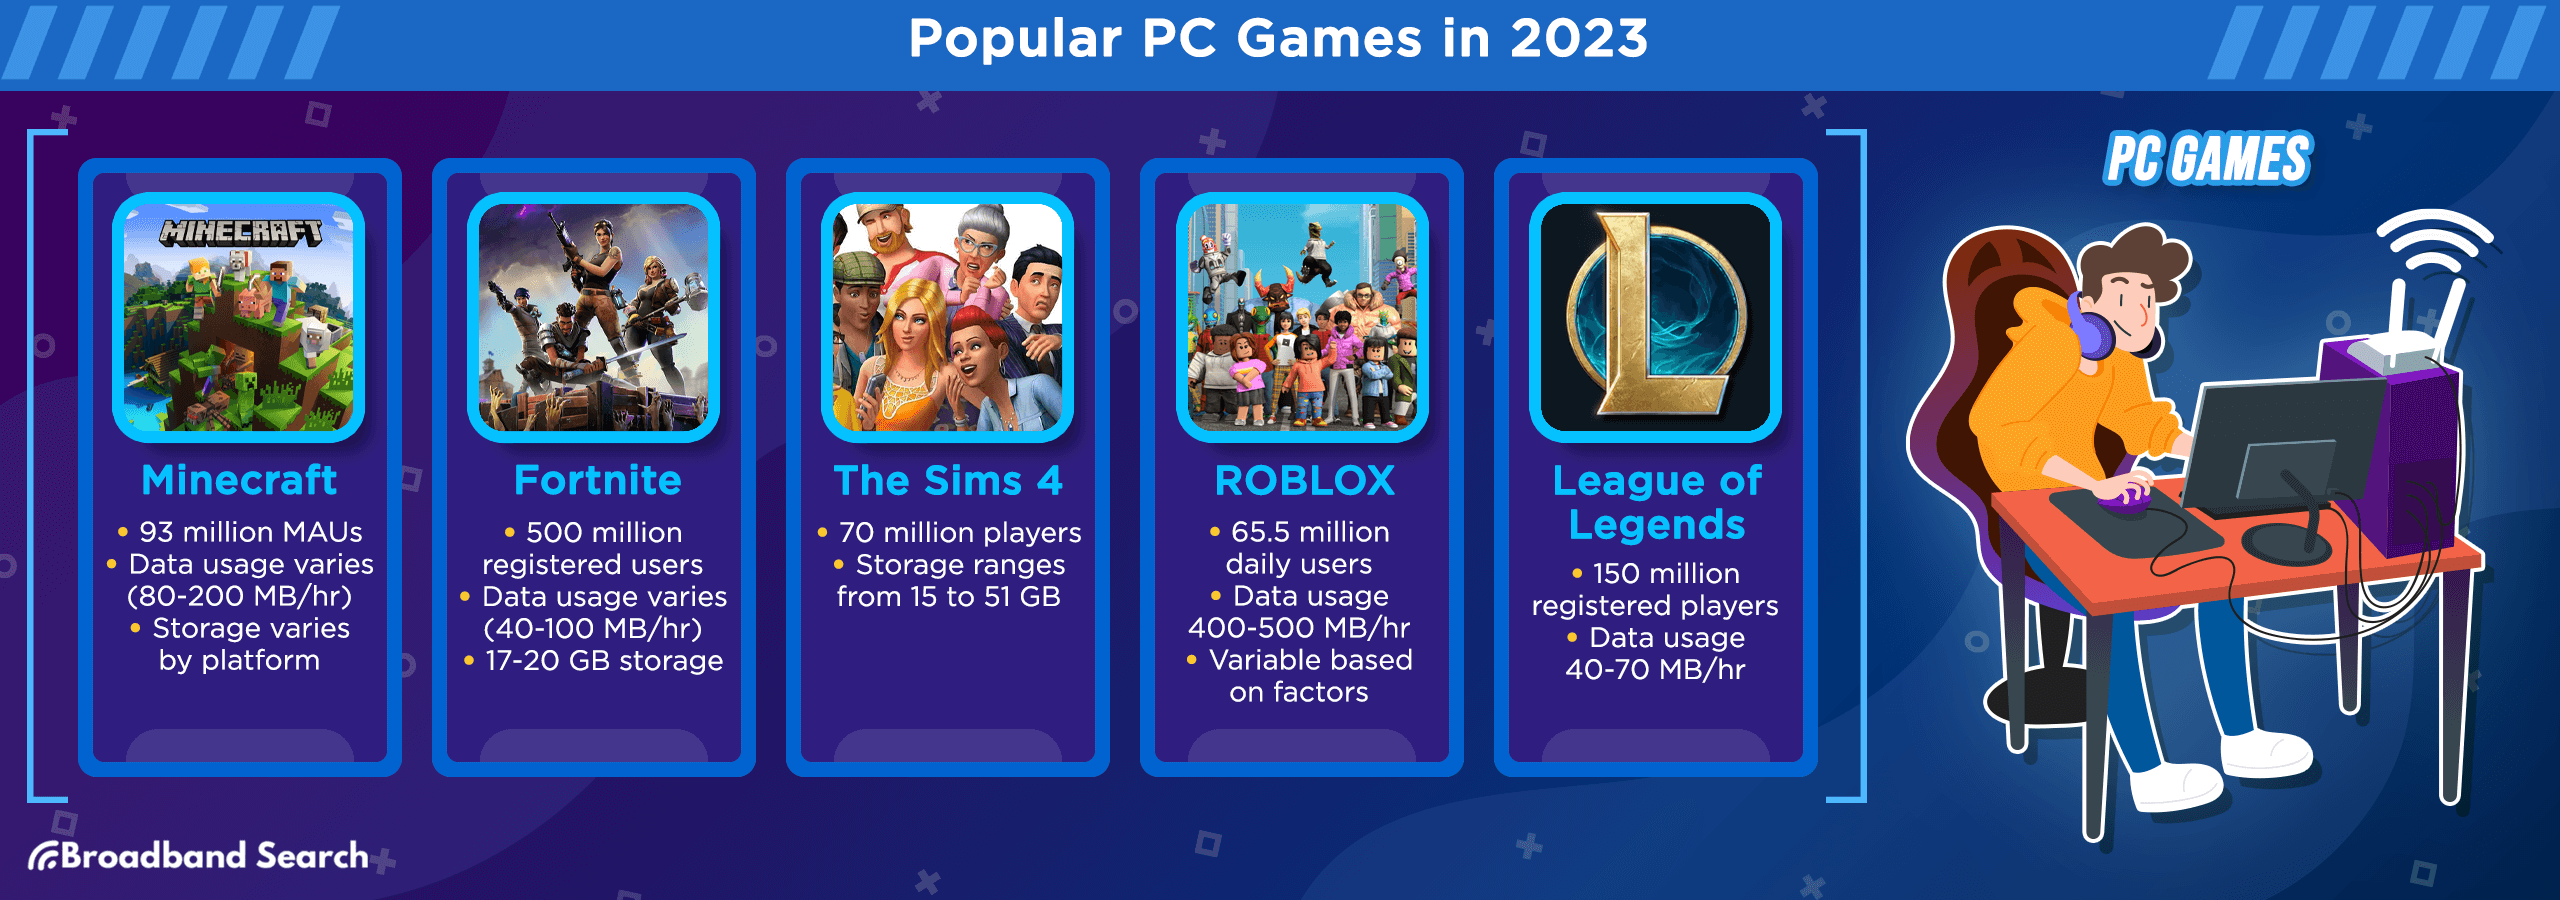 User count and data usage on popular PC games in 2023